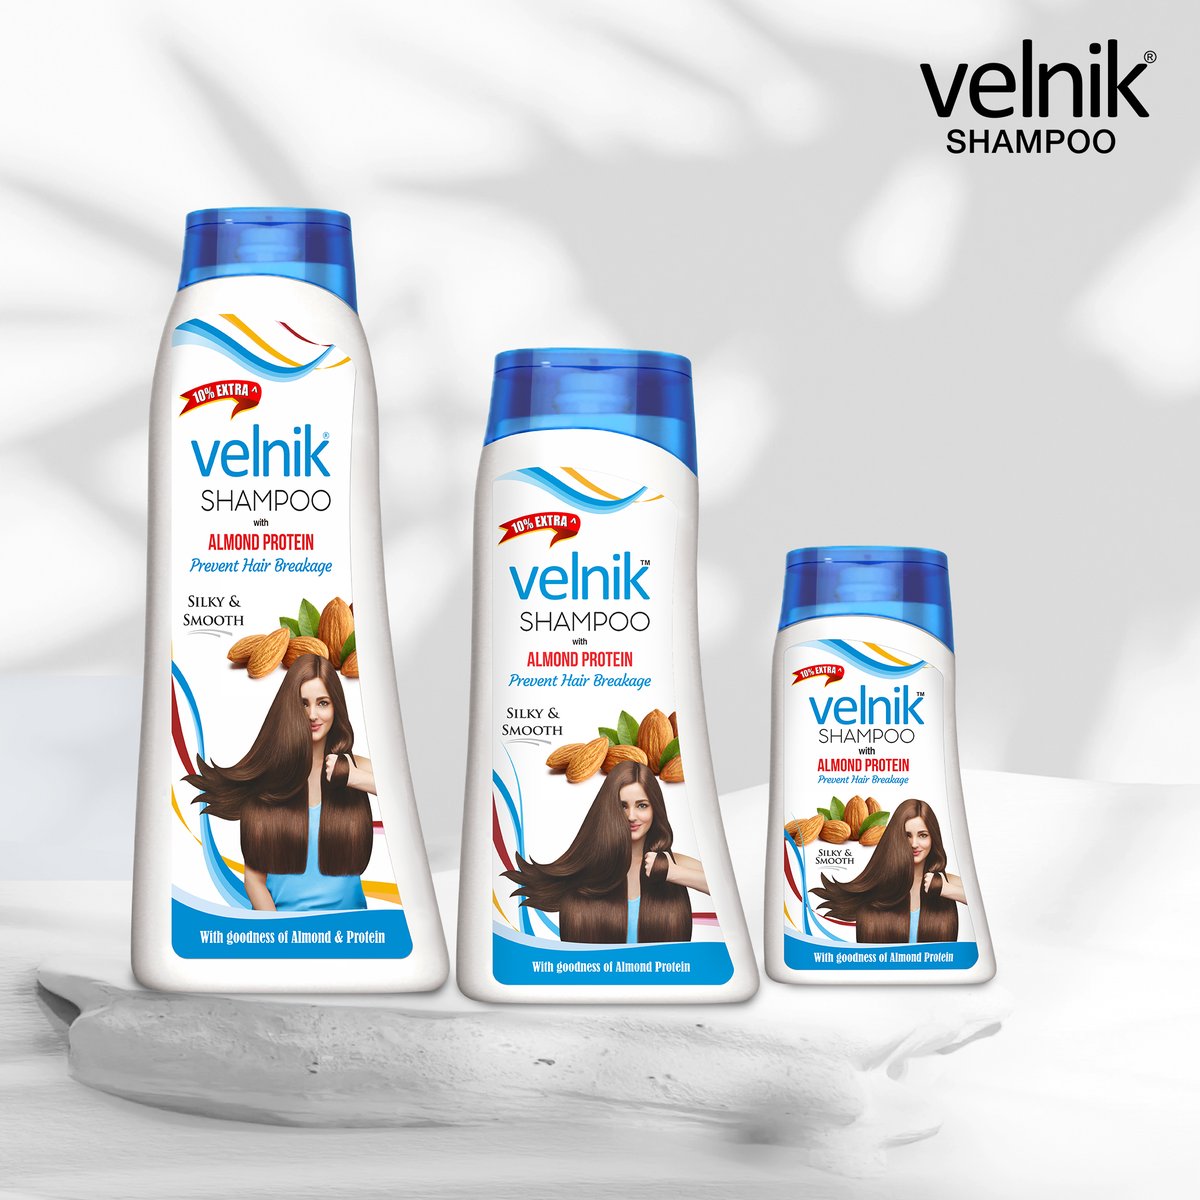 Velnik Shampoo with Vitamin E infused Almond Protein - the perfect nourishing blend for strong, and healthy hair.

#Velnik #VelnikShampoo #VelnikBrand #HairShampoo #Shampoo #SmoothHair #LongHair #SummerHairCare #LongHair #AntiDandruff #StrongHair #VelnikIndia